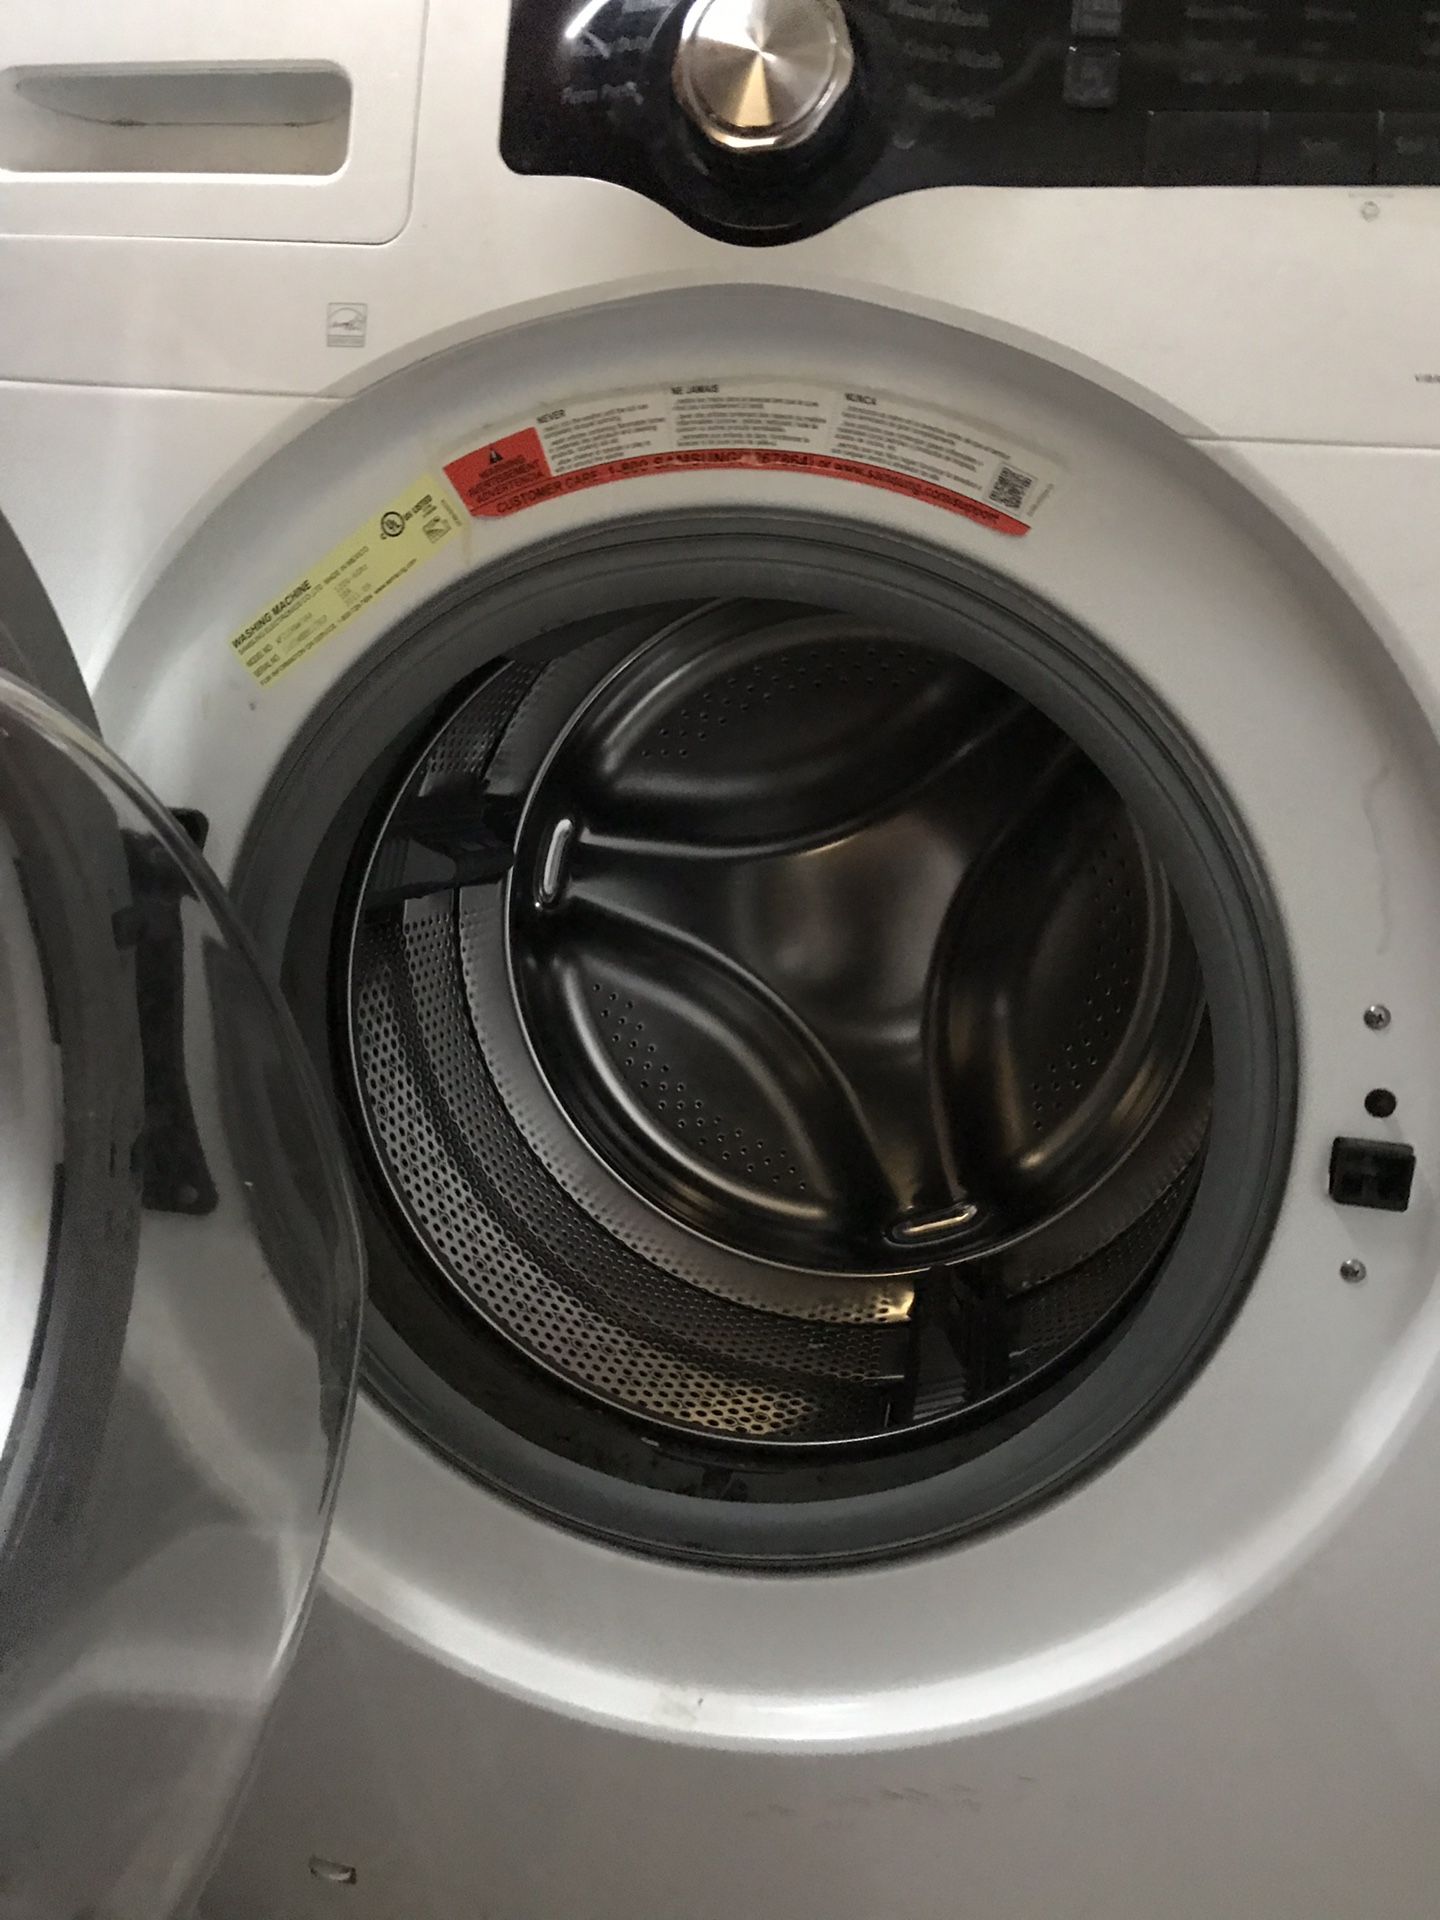 Samsung washer and a Kenmore dryer work great